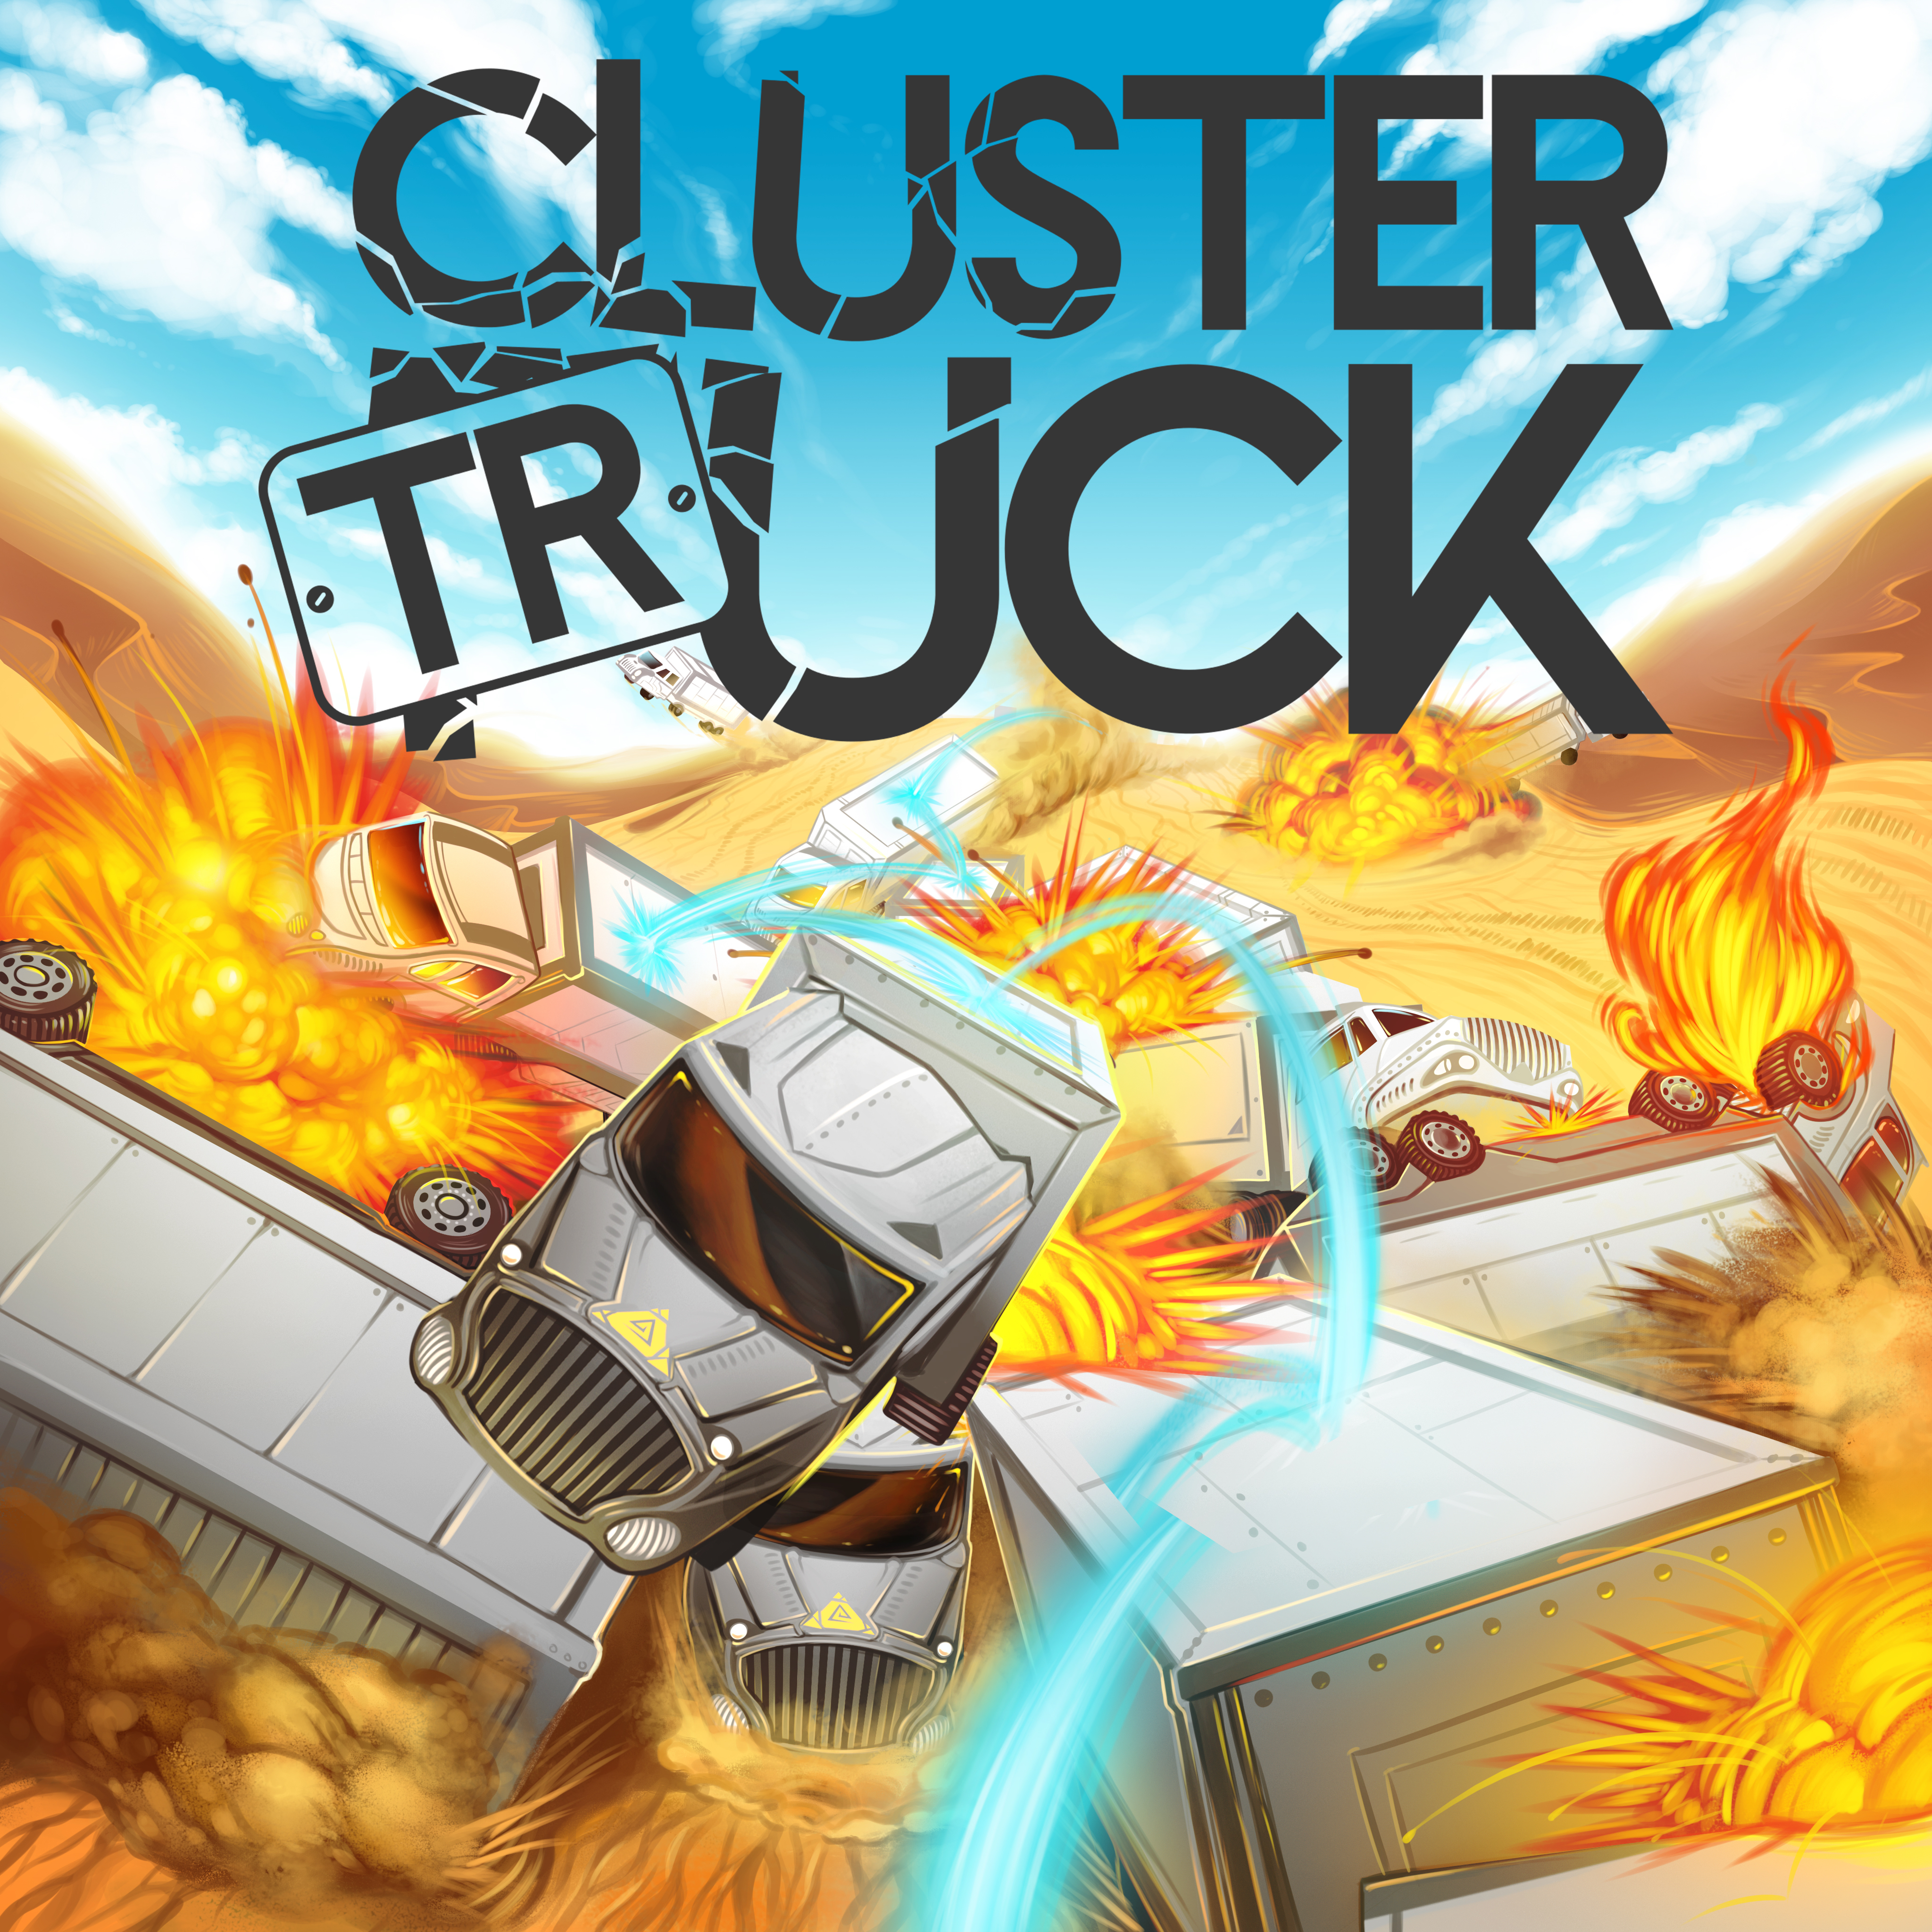 REVIEW | Running & Leaping Towards A "Clustertruck" ESH